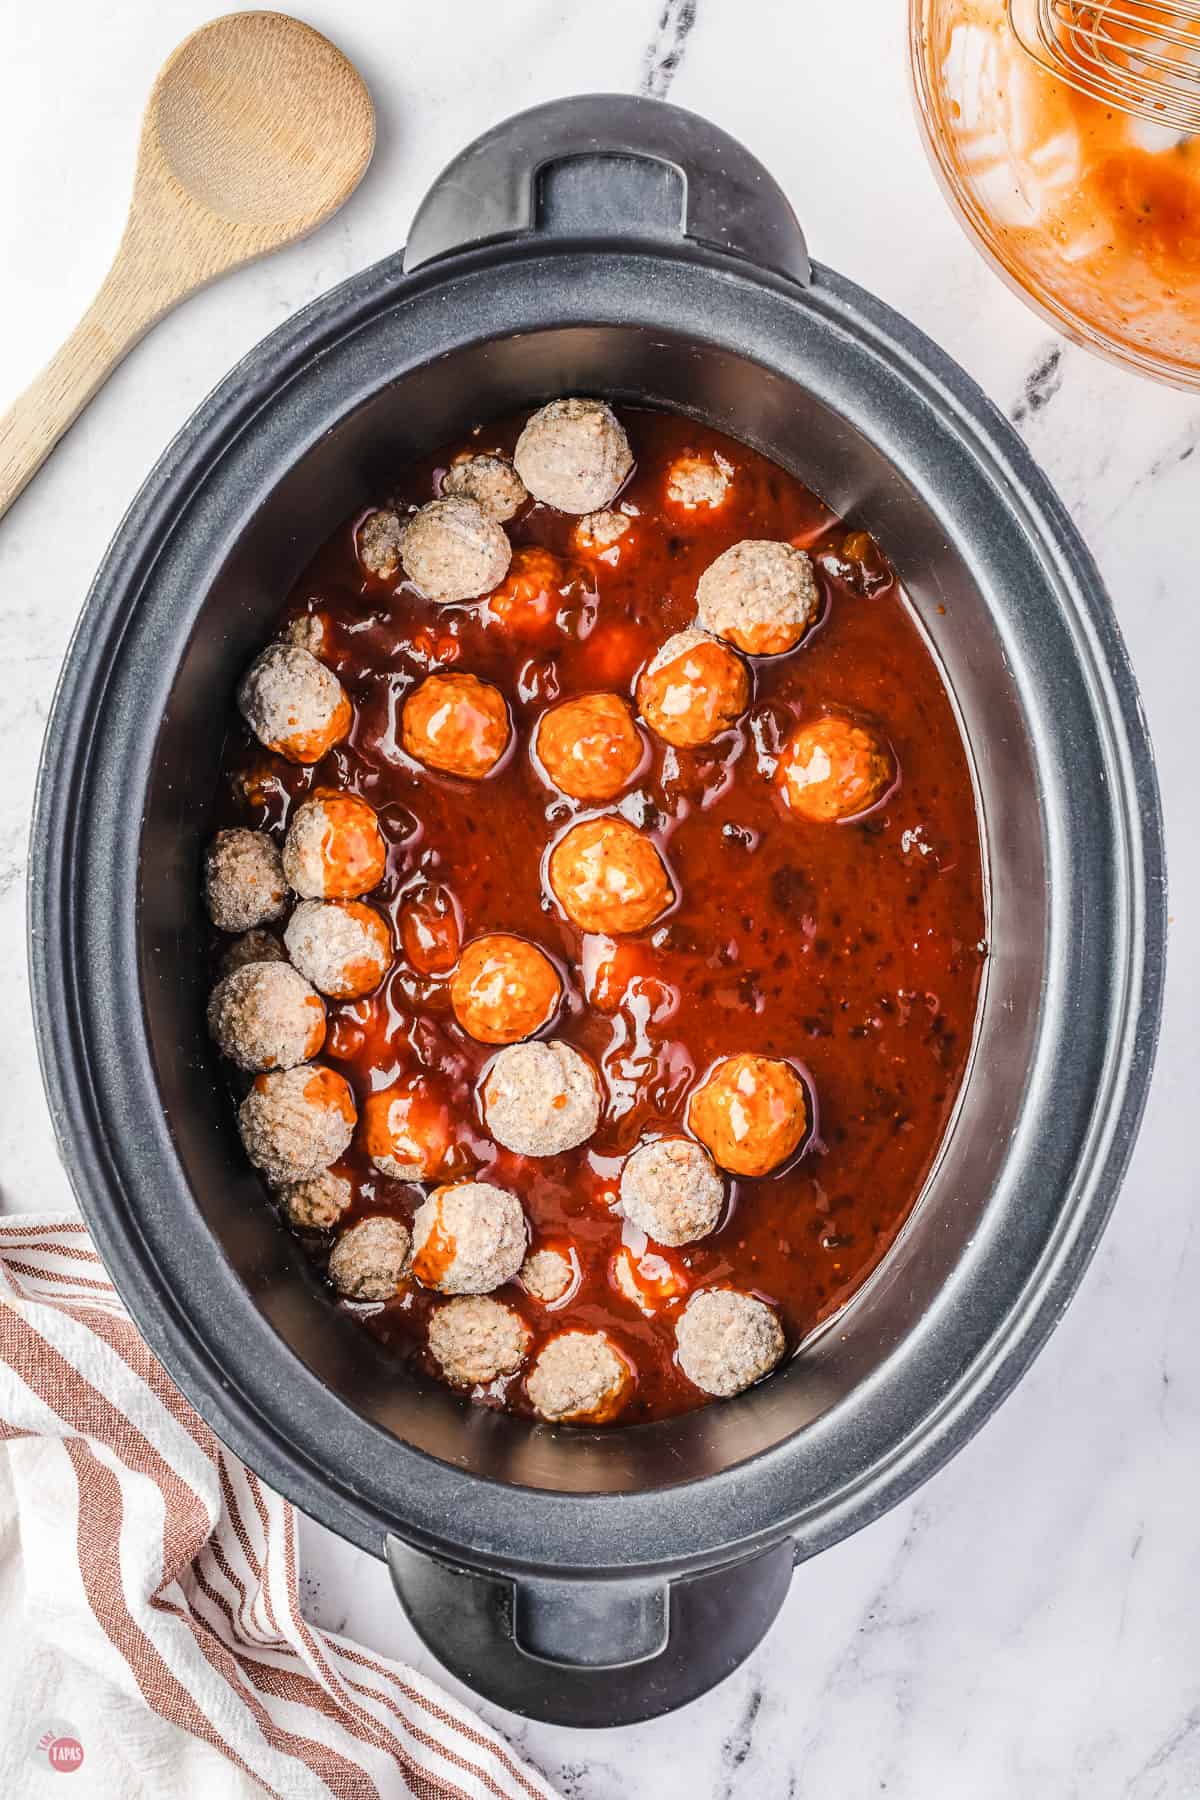 Crock Pot Sweet and Sour Meatballs (+Video) - The Country Cook